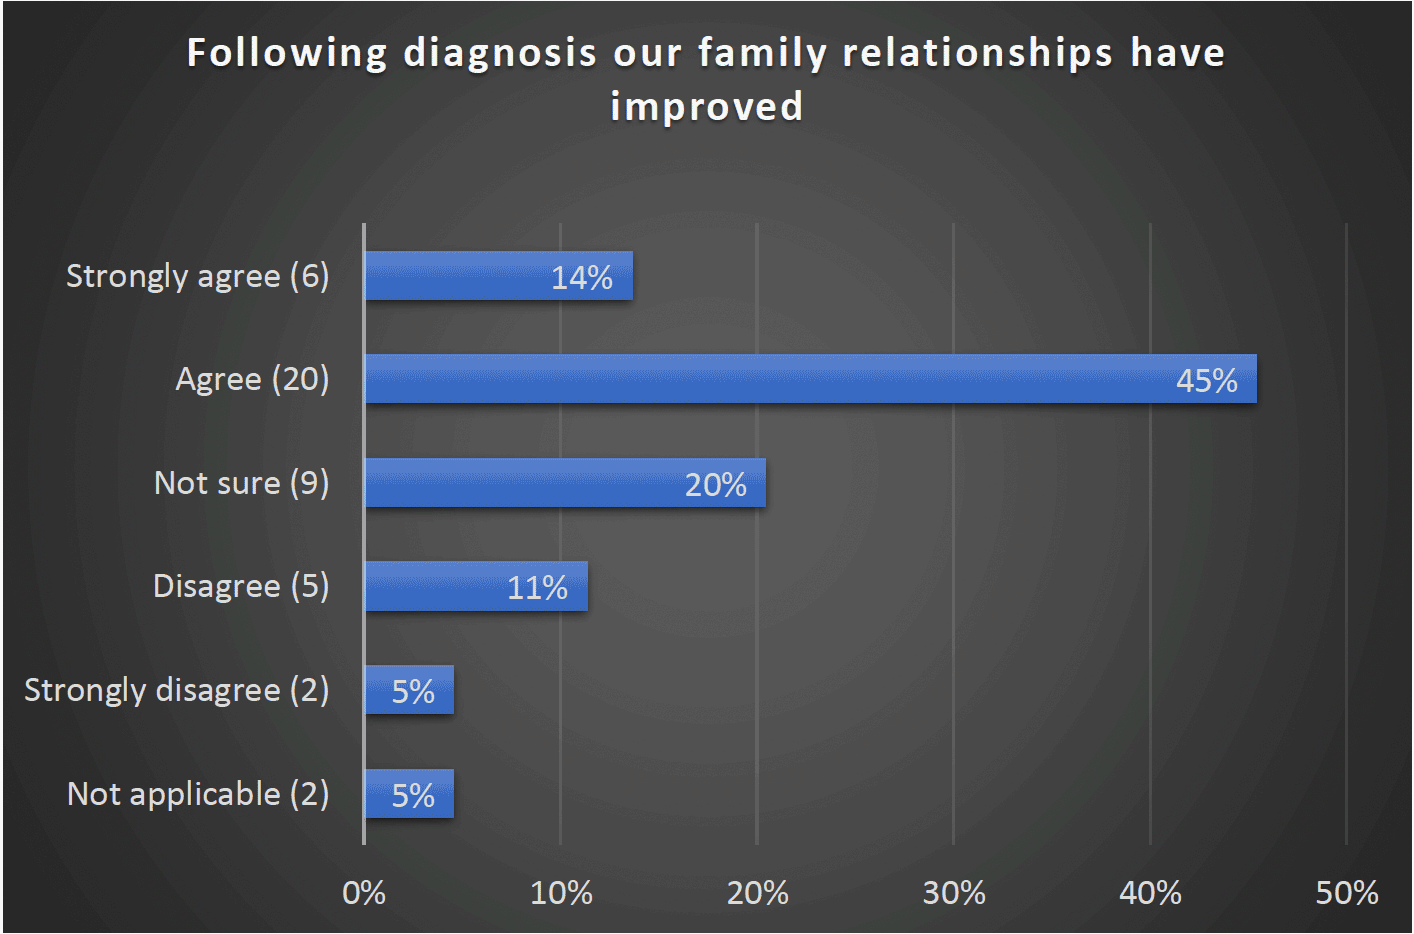 Following diagnosis our family relationships have improved - Strongly agree (6) 14%, Agree (20) 45%, Not sure (9) 20%, Disagree (5) 11%, Strongly disagree (2) 5%, Not applicable (2) 5%